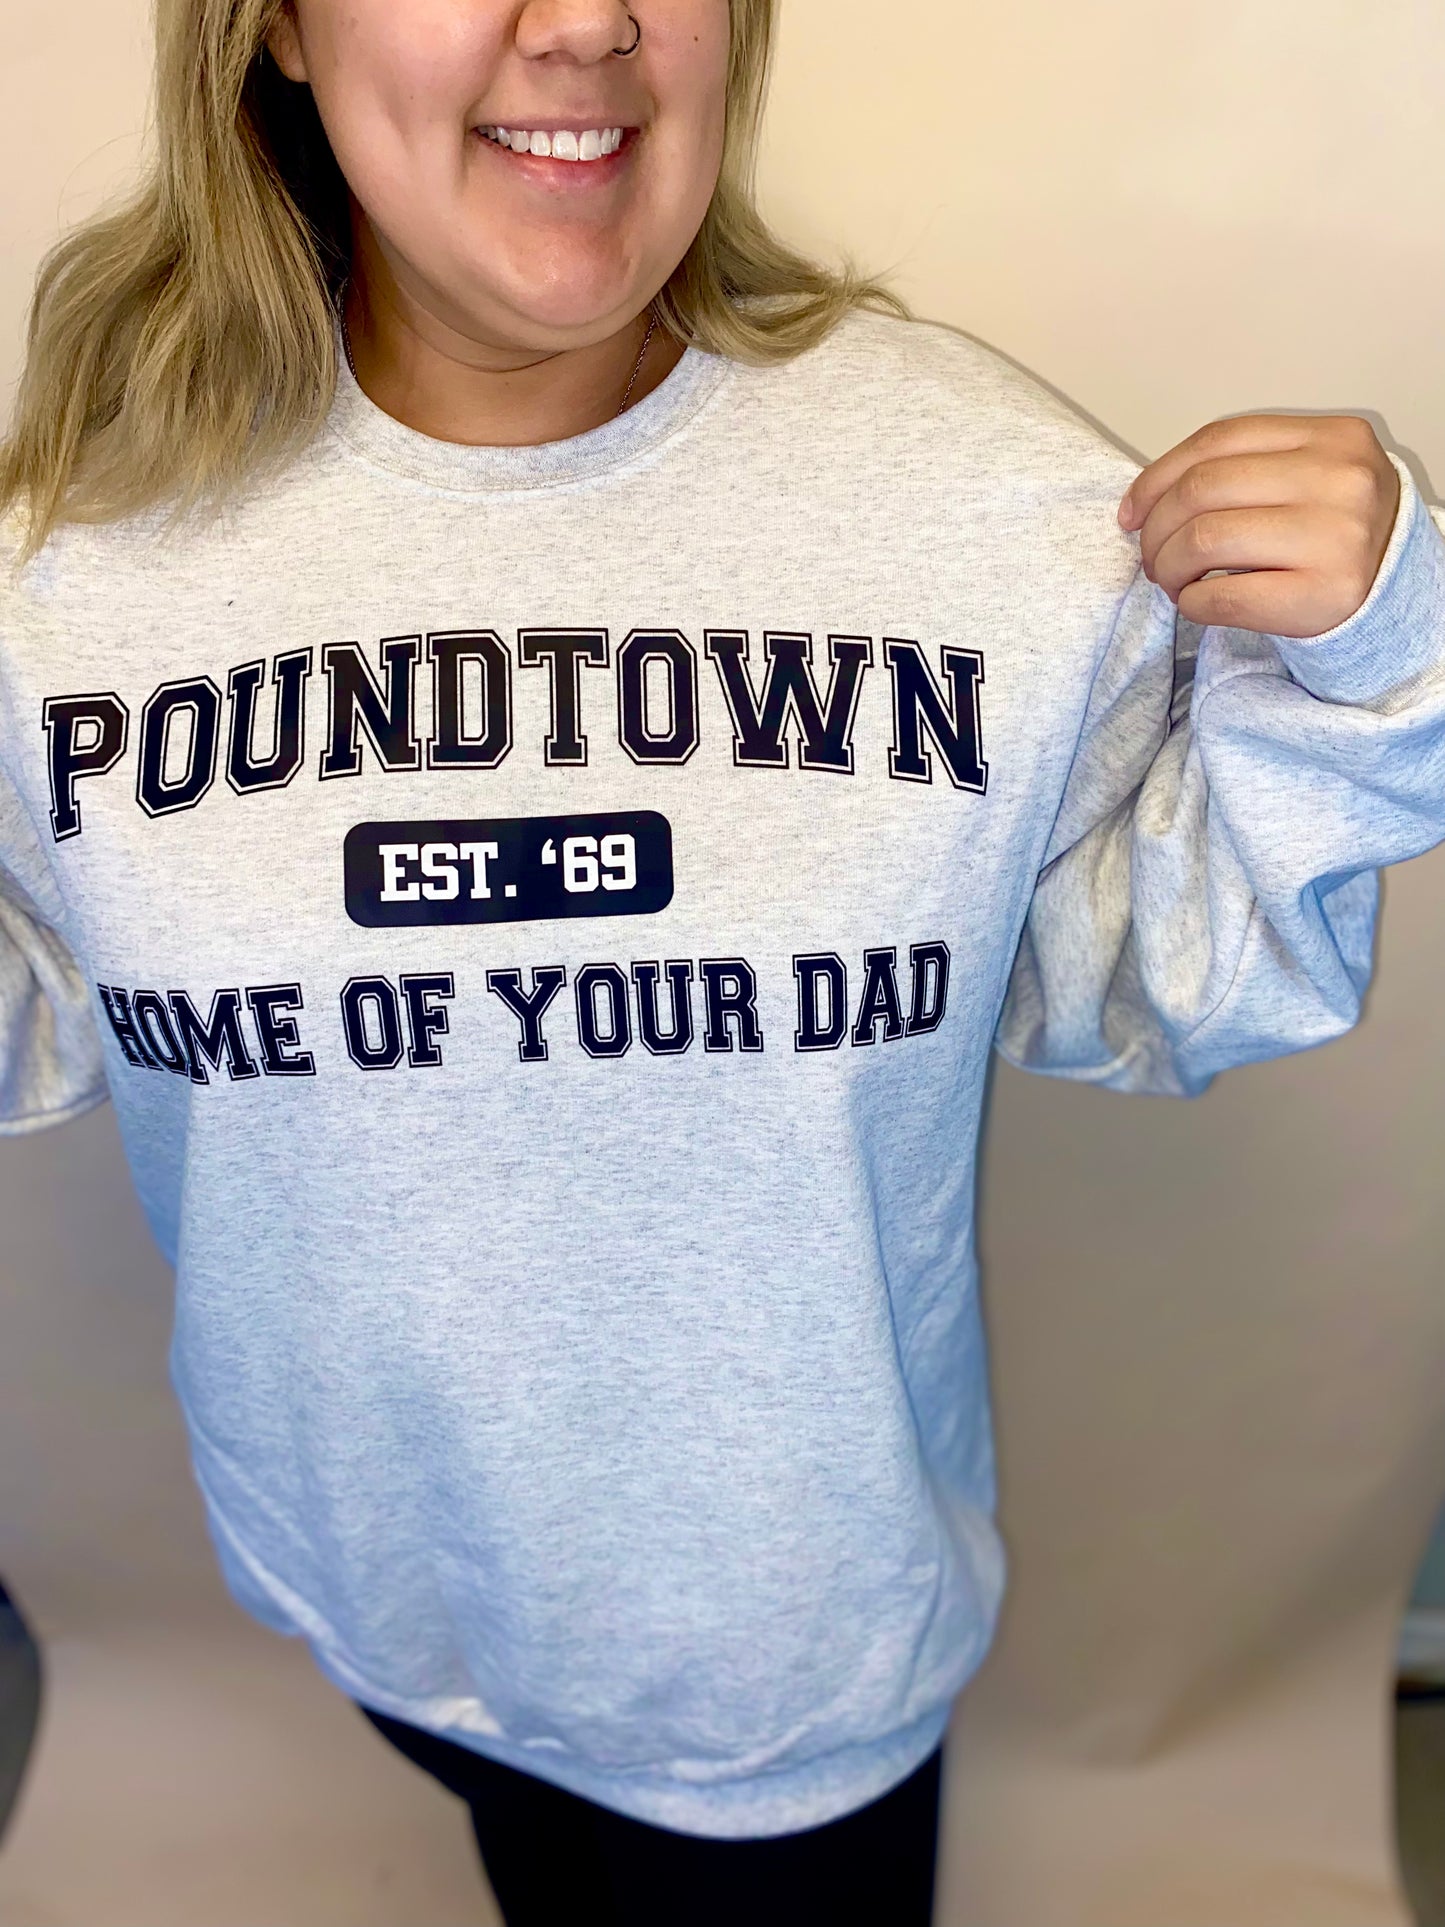 Poundtown home of your dad